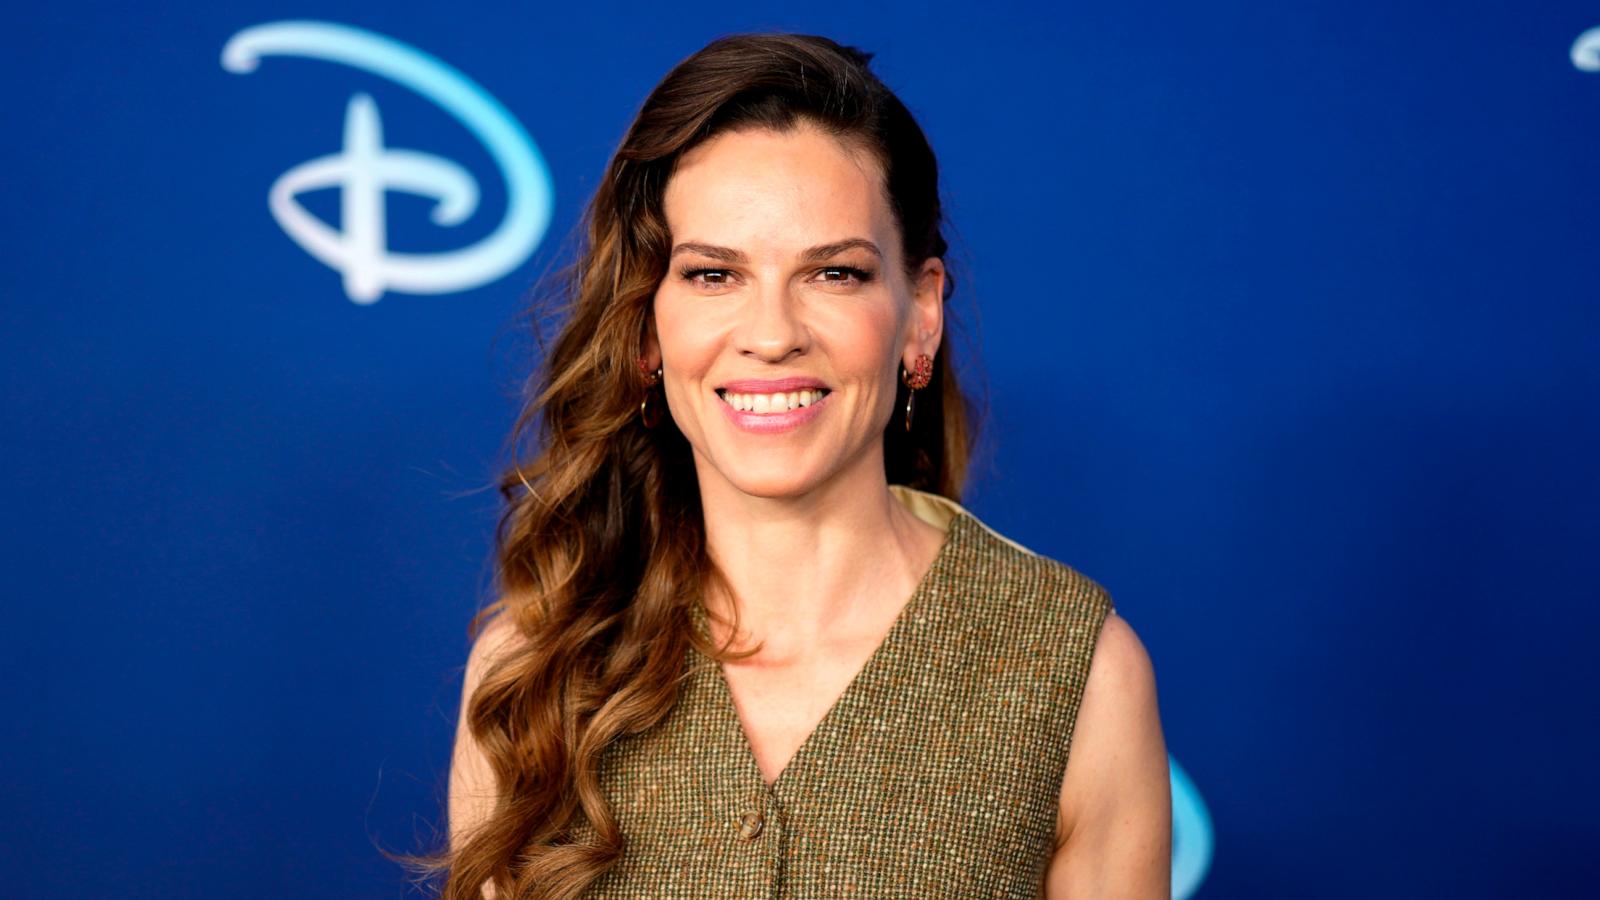 PHOTO: In this May 17, 2022 file photo, Hilary Swank attends the Disney 2022 Upfront presentation at Basketball City Pier 36, in New York.